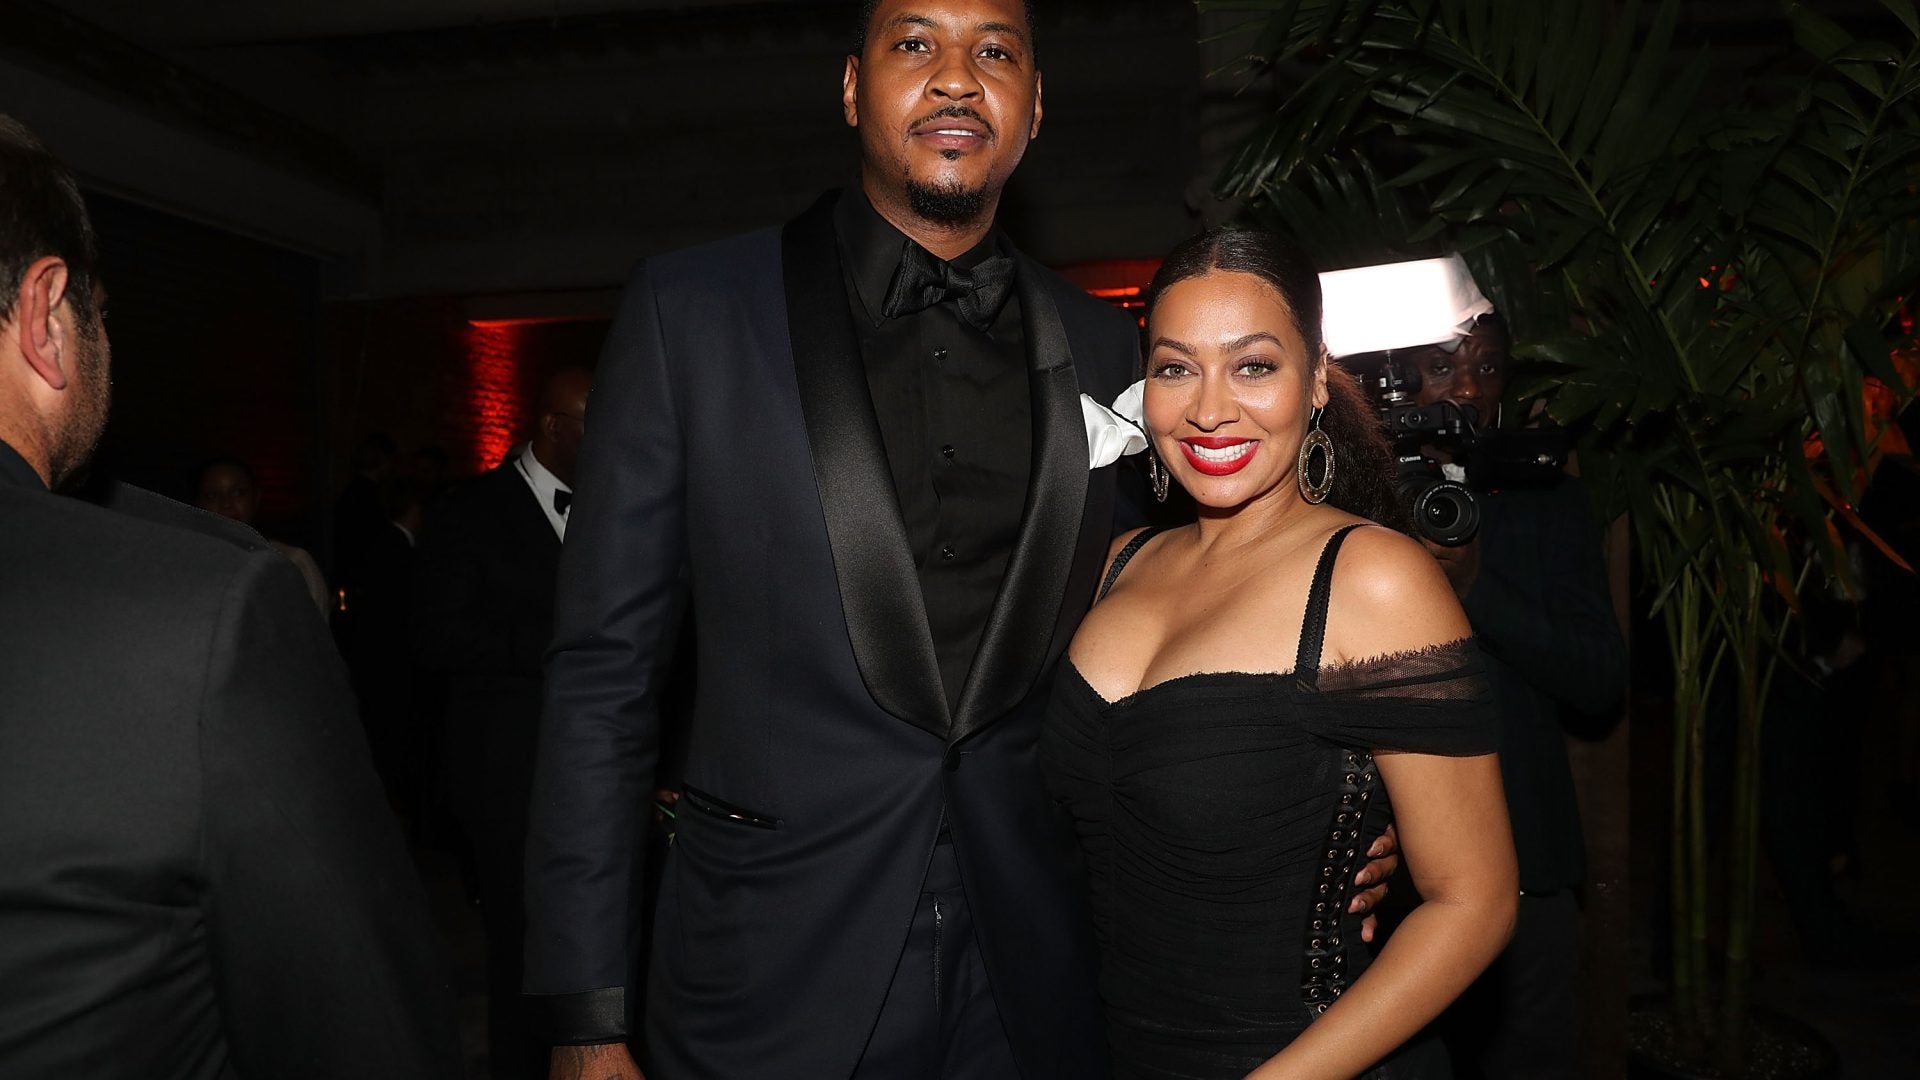 LaLa Opens Up About Carmelo Split, Startling Cheating Scandal: "I Didn't Go Into This Marriage Expecting That"